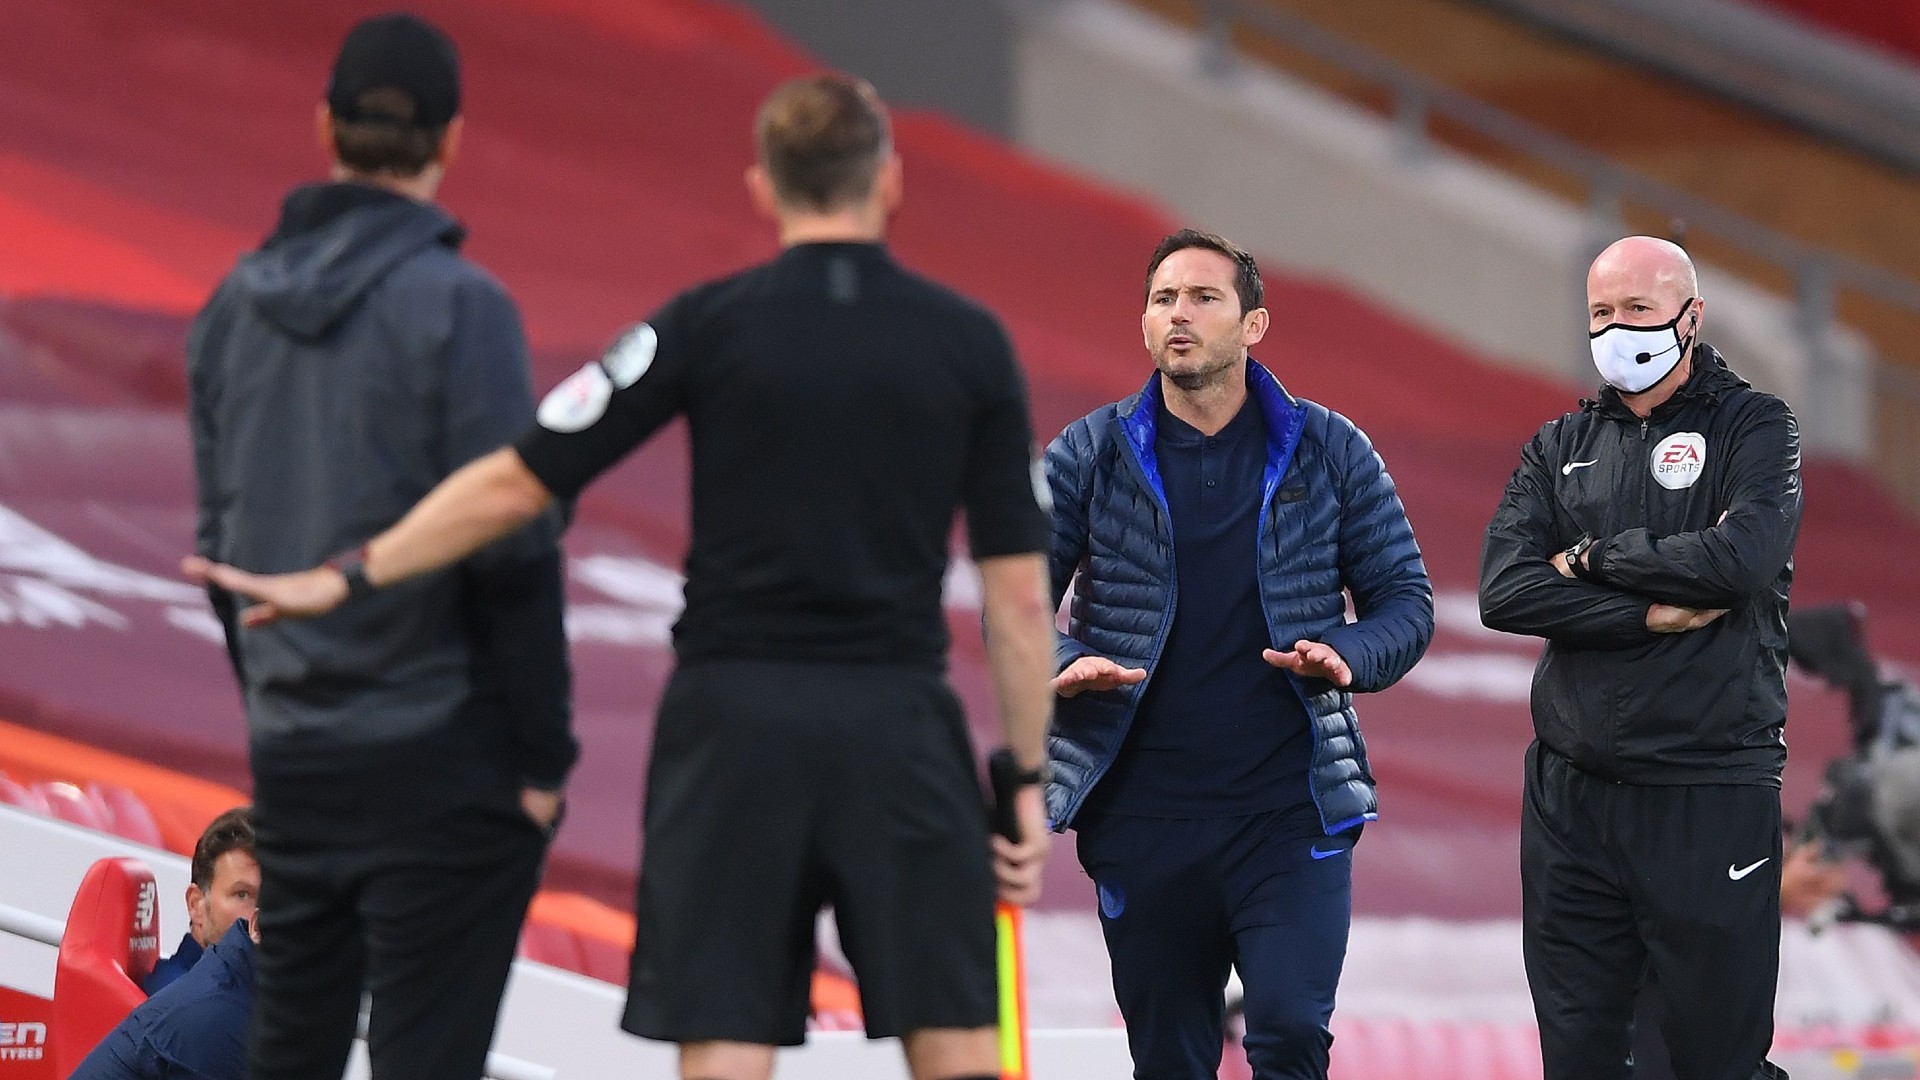 Lampard will be stronger after Klopp clash, says Redknapp